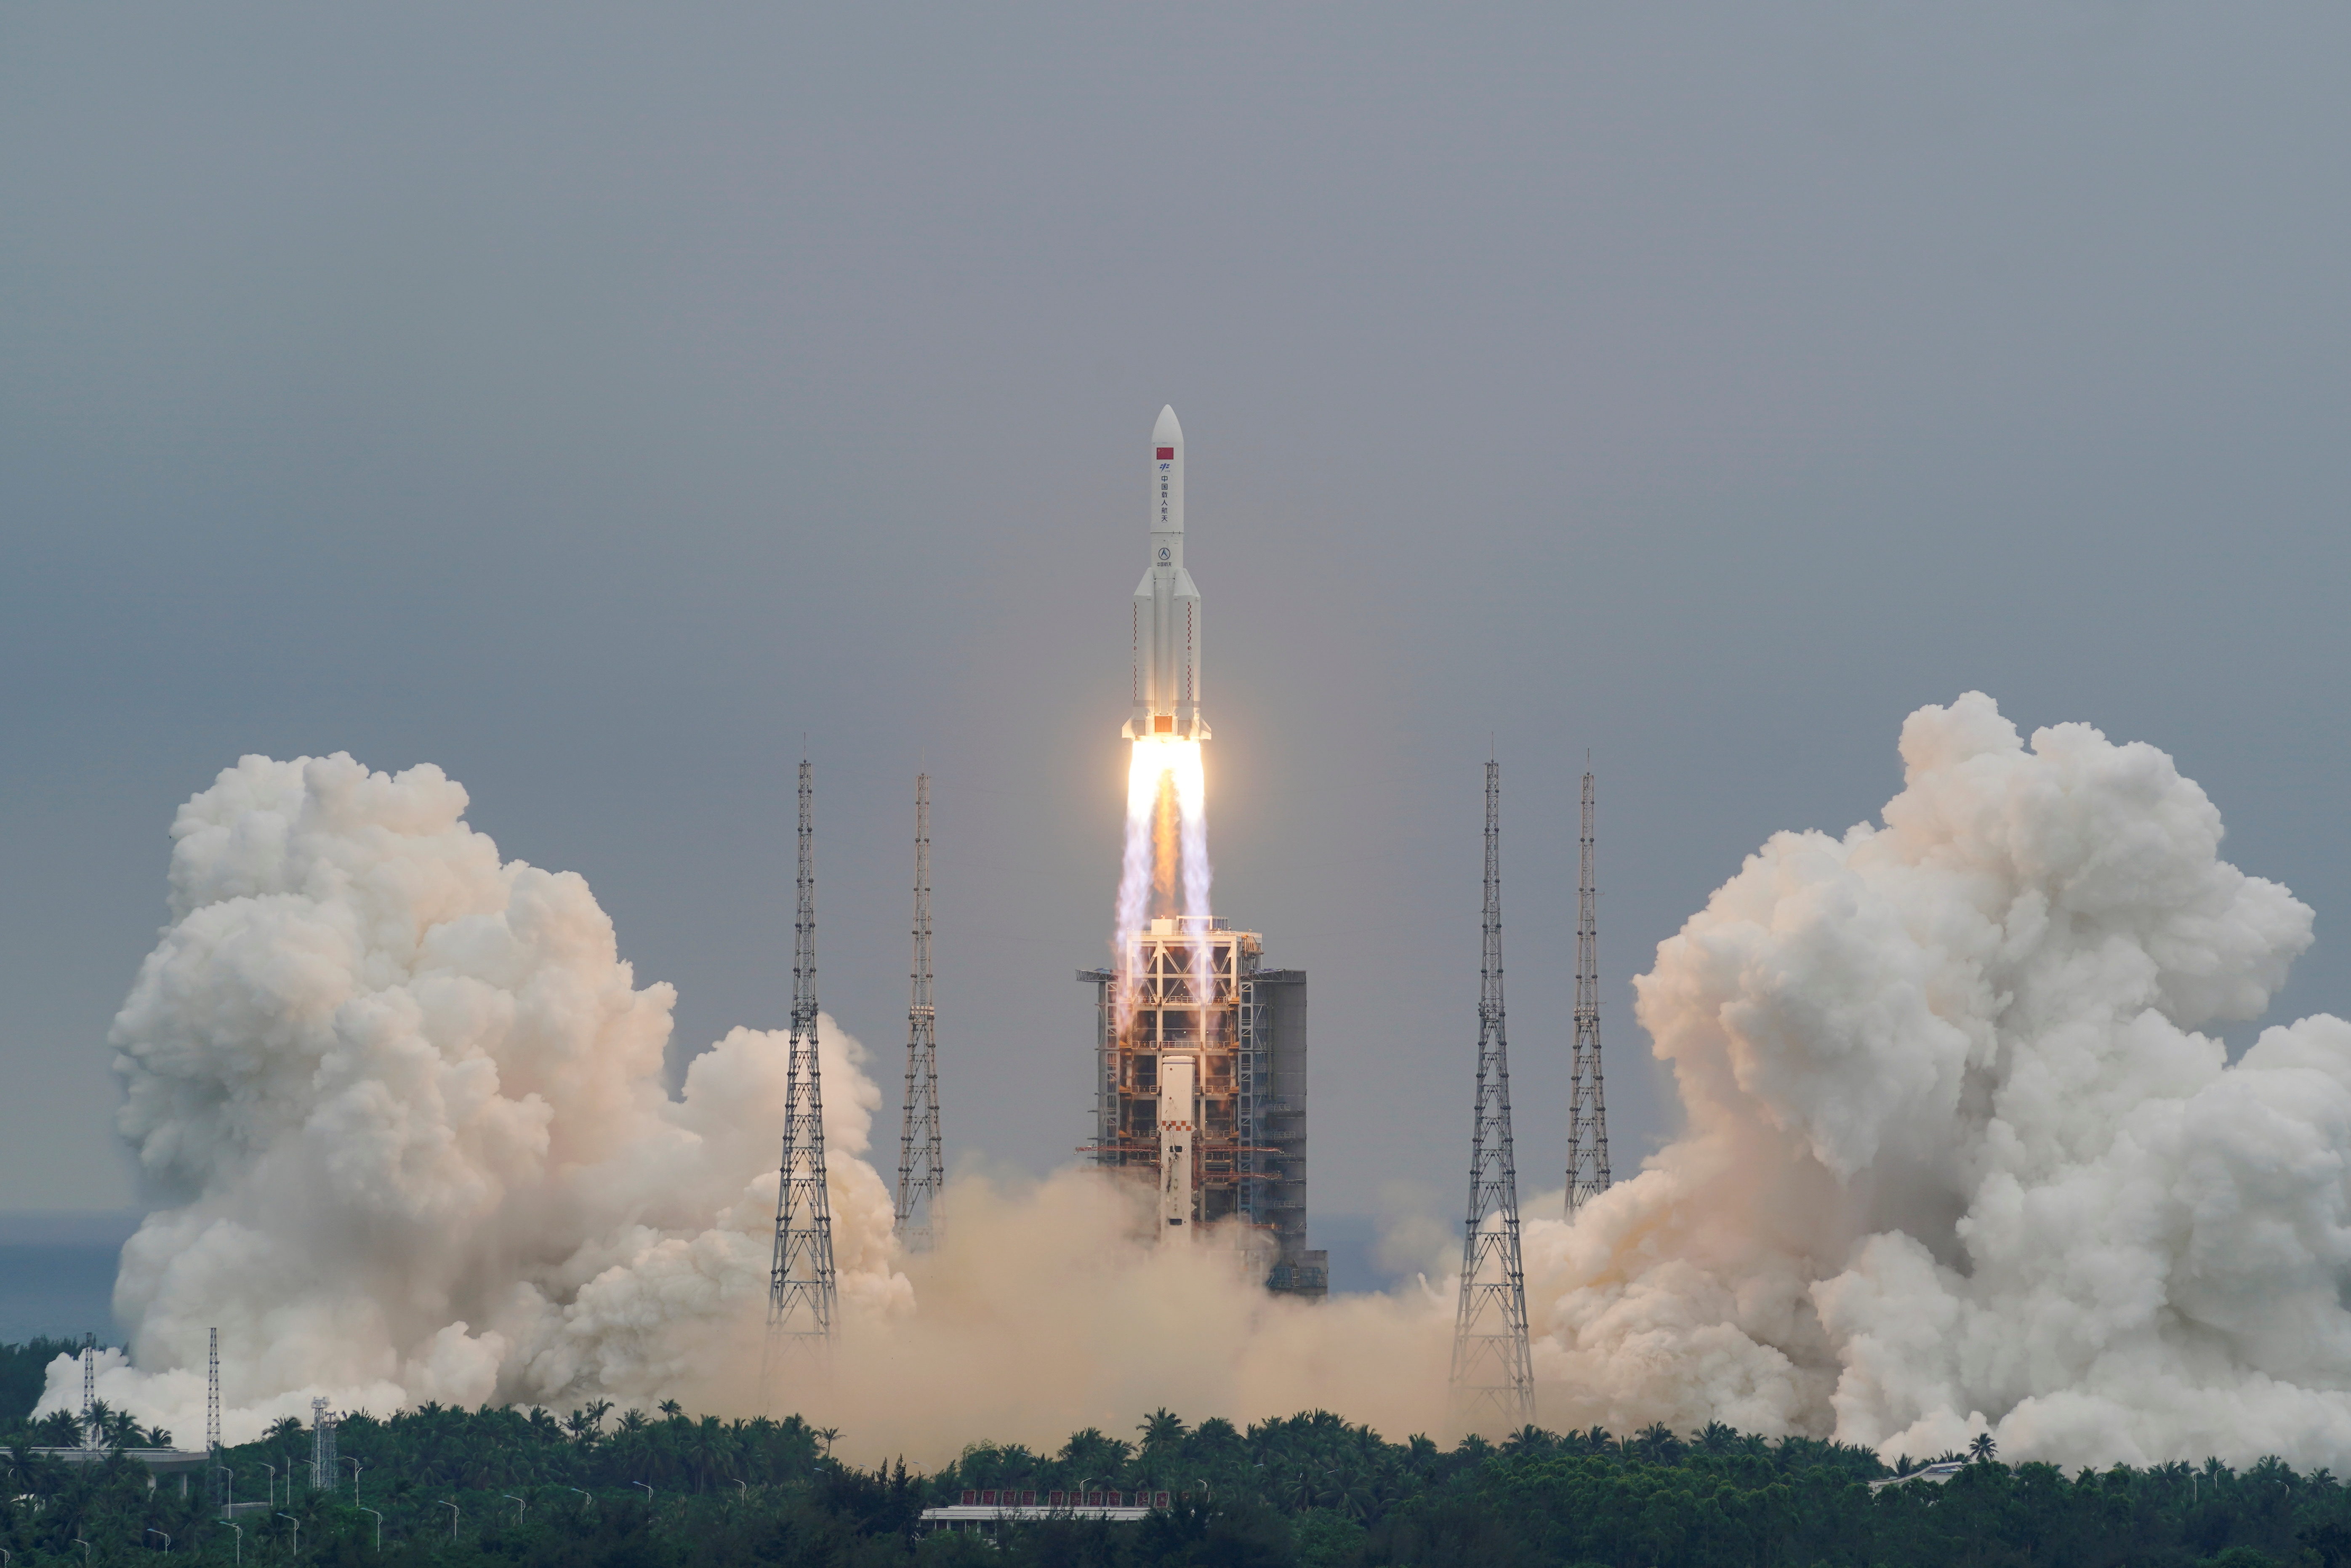 Long March-5B Y2 rocket, carrying the core module of China's space station Tianhe, takes off from Wenchang